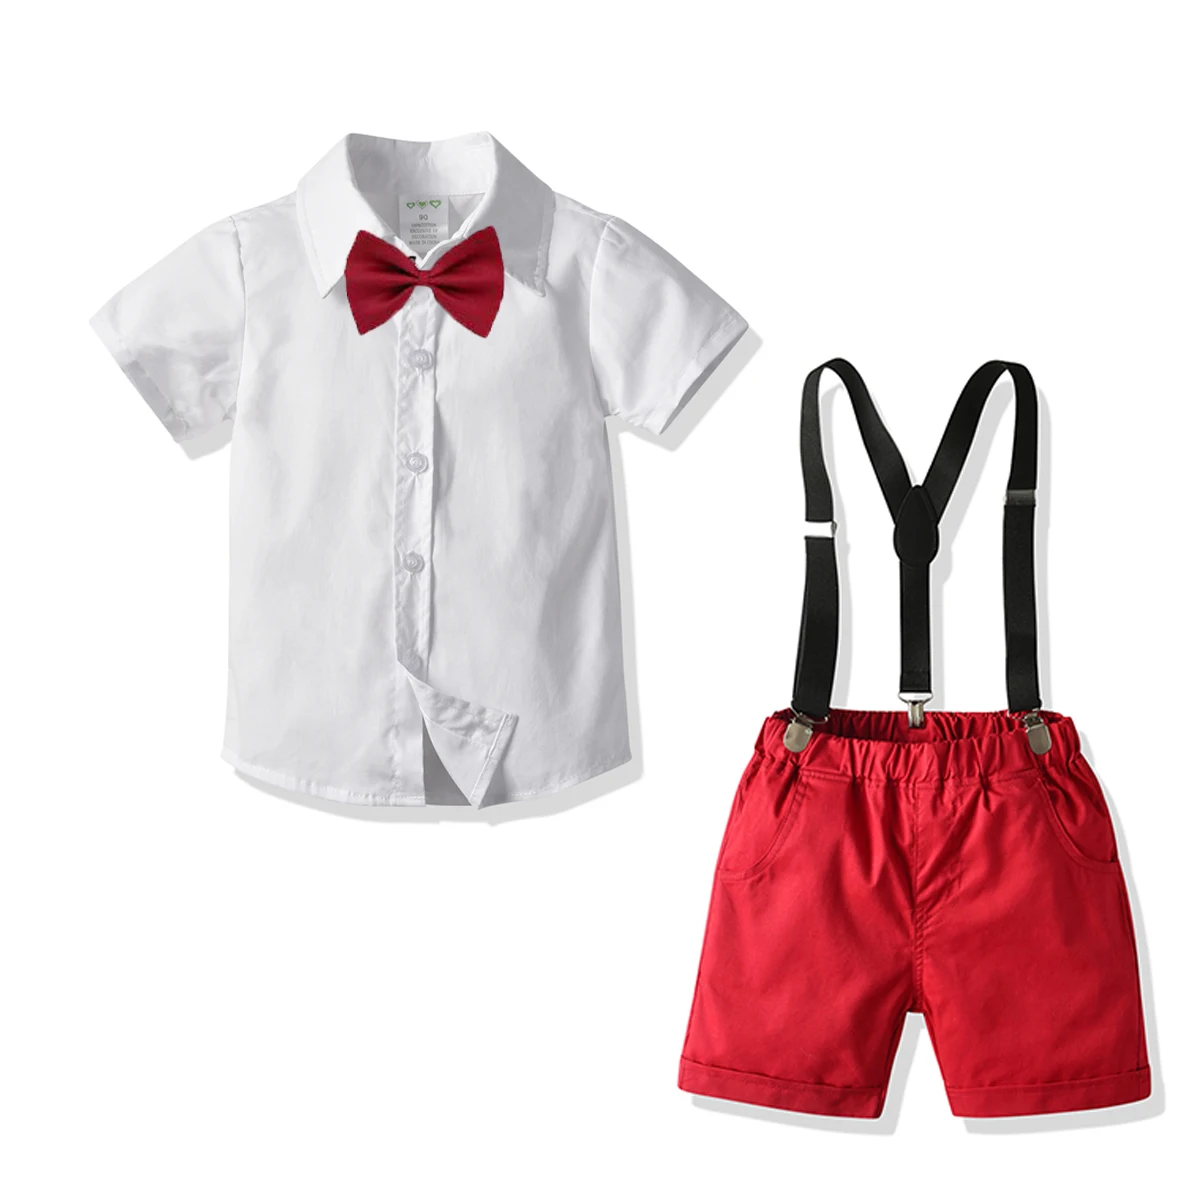 Toddler Kids Clothes White Shirt + Navy Shorts 3 Pieces Baby Boy Outfit Arrived Summer Children Costume